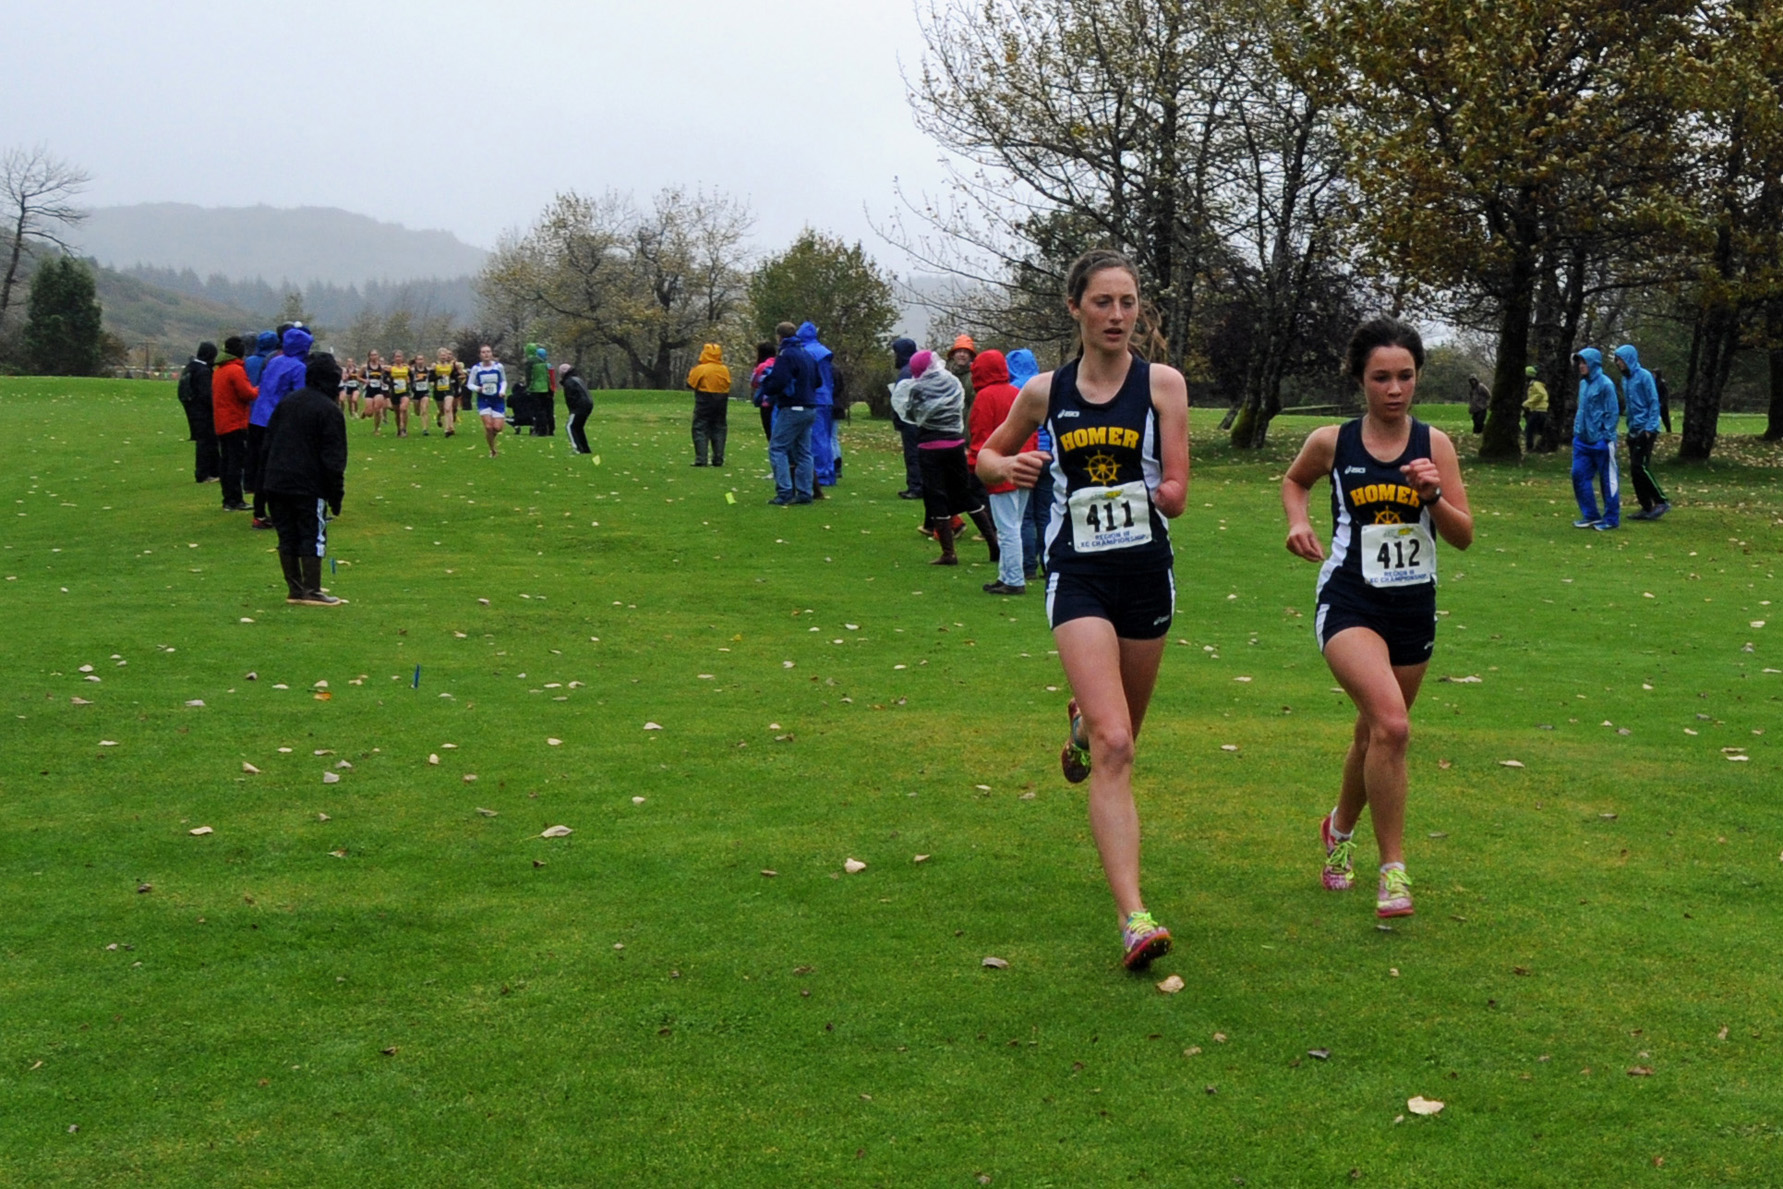 Homer runners Megan Pitzman, 411, and Molly Mitchell, 412, hold the lead in regions cross-country varsity girls competition in Kodiak Sept. 27. Pitzman was the first to cross the finish line, with Mitchell in second.